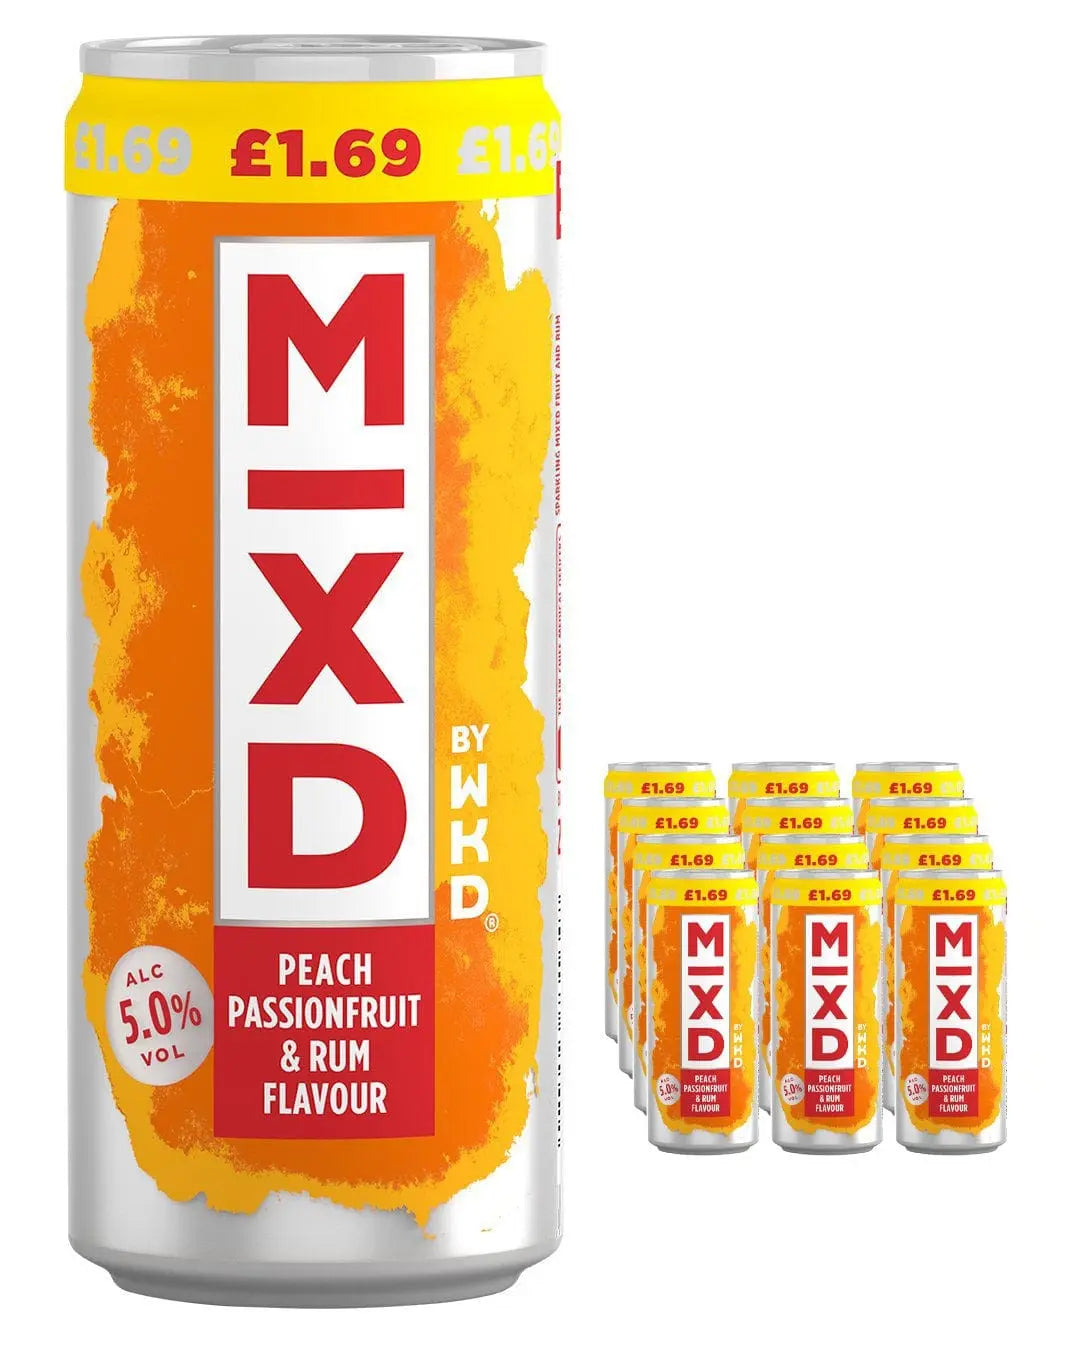 WKD Mixed Peach, Passionfruit & Rum Premixed Can, 250 ml Ready Made Cocktails